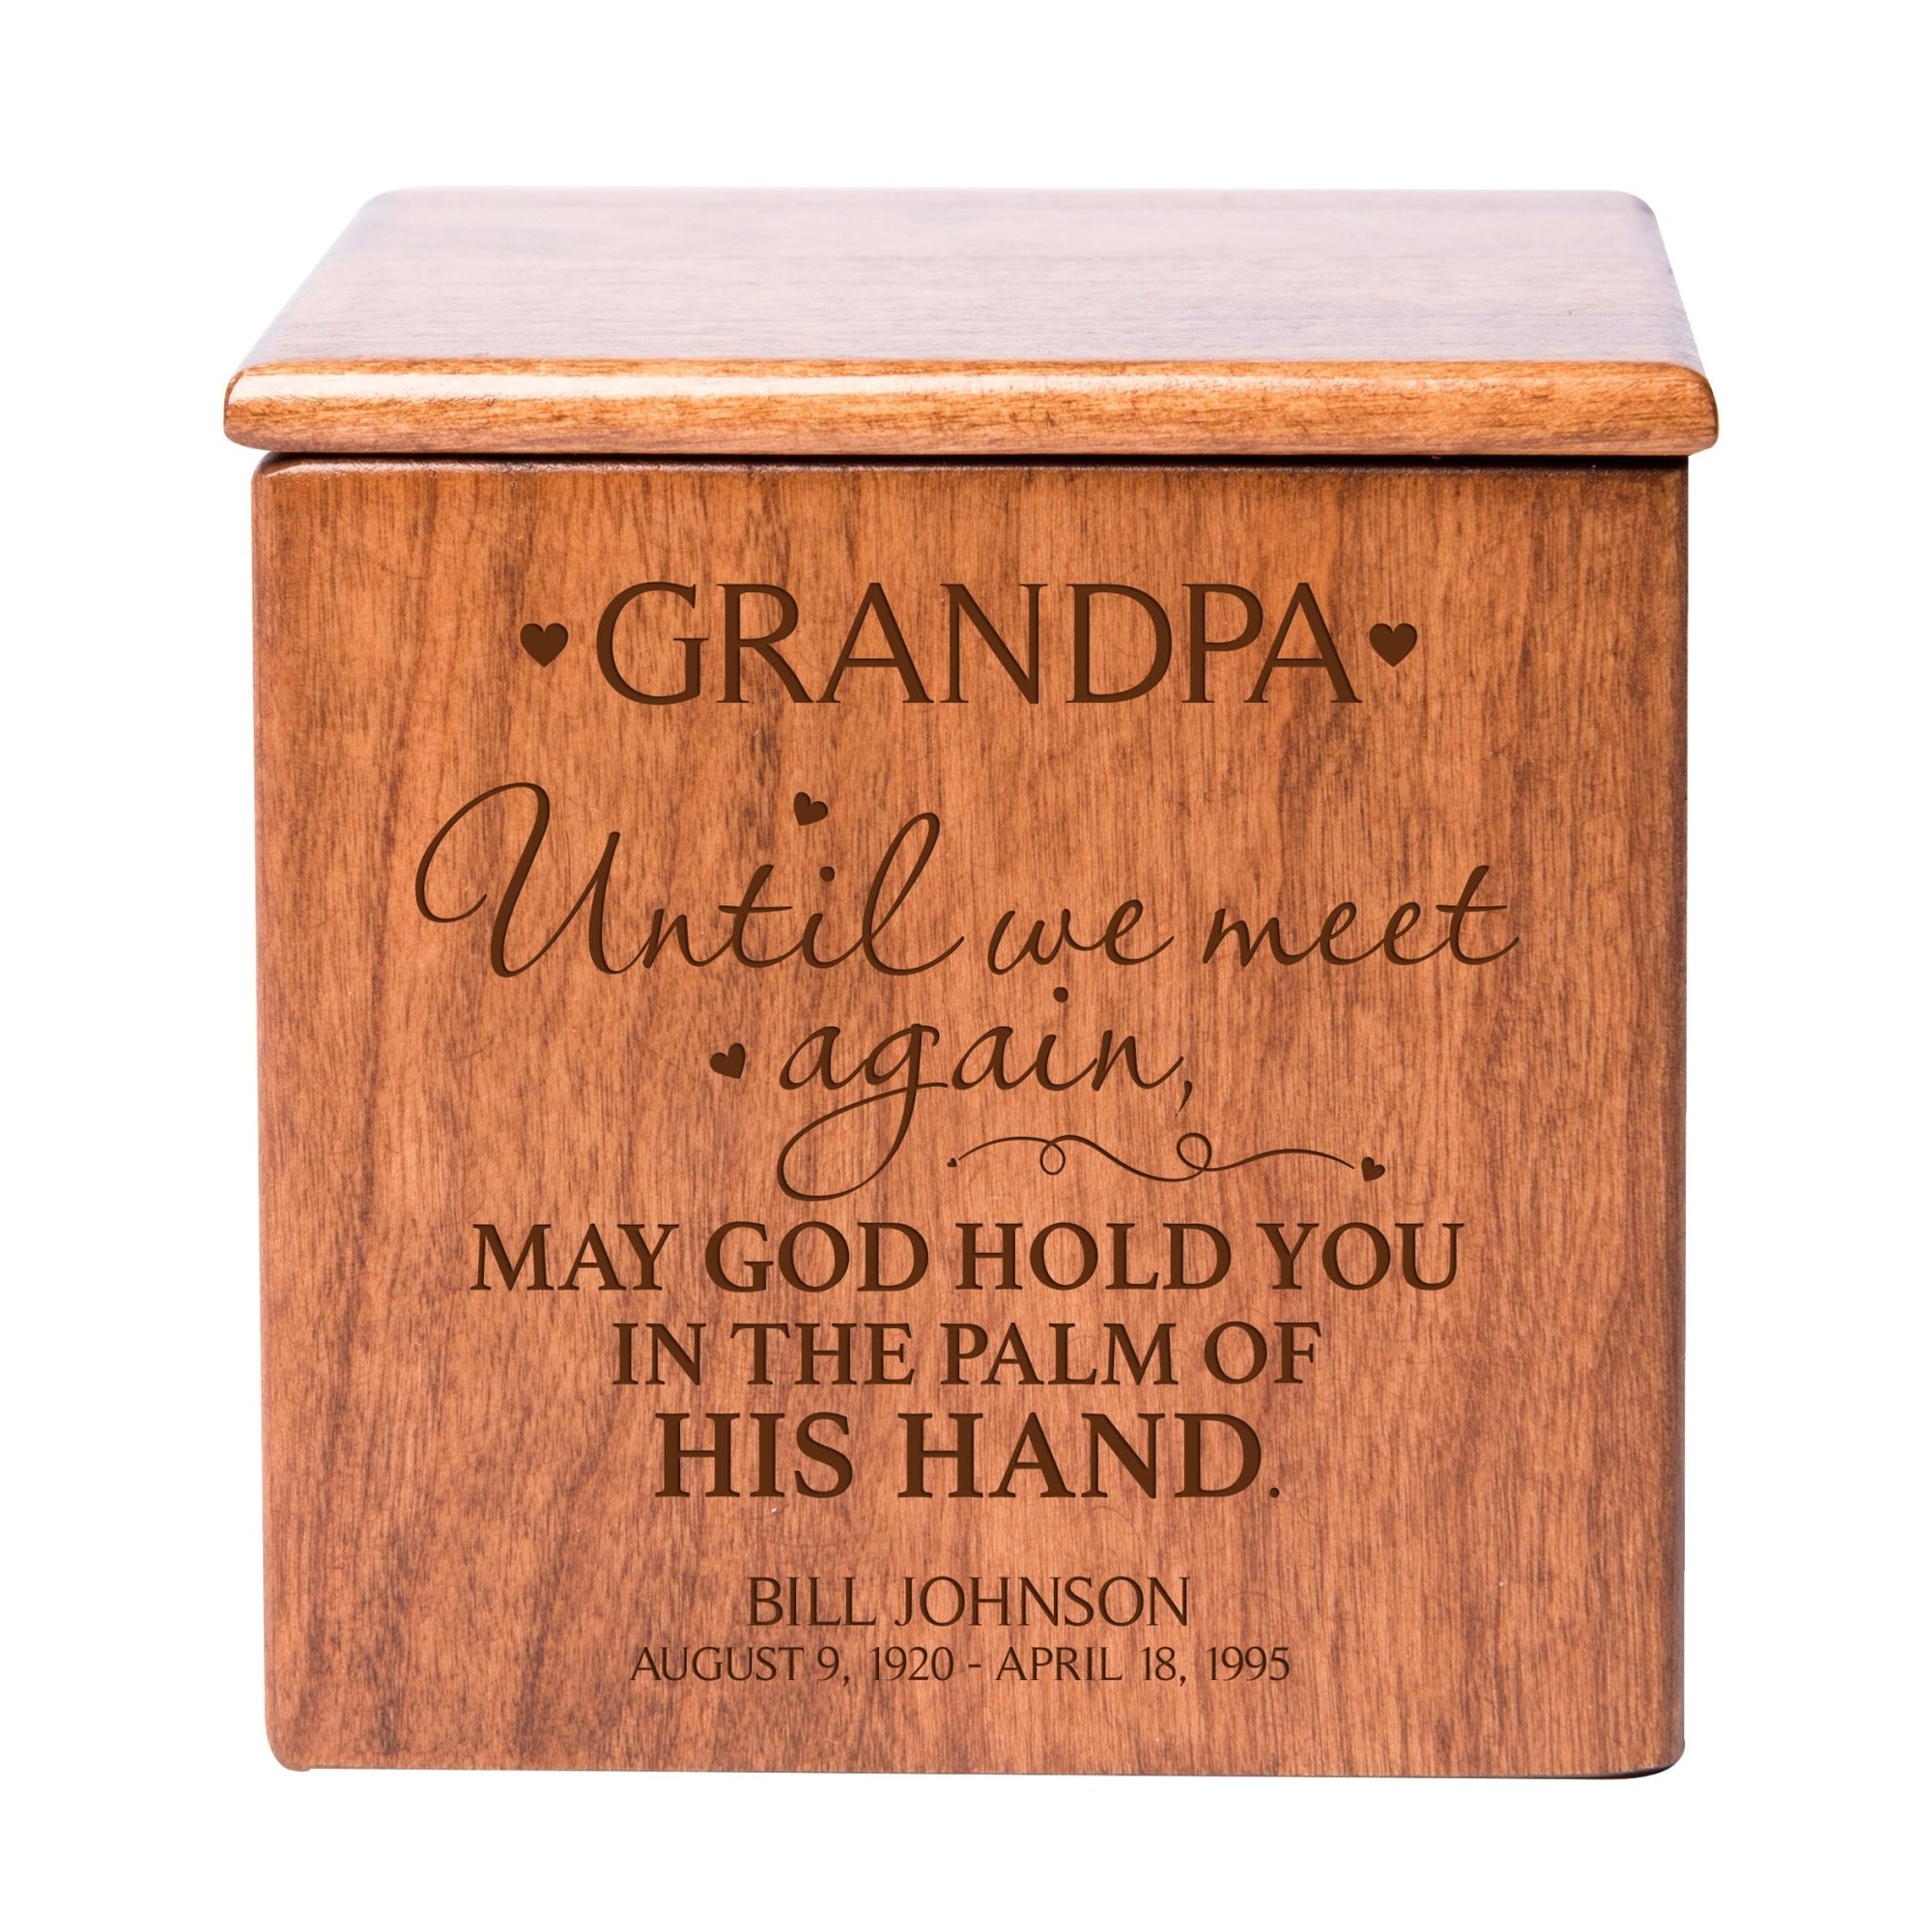 Custom Engraved Memorial Cremation Urn Box Holds 49 Cu Inches Of Human Ashes (It Broke Our Hearts Grandpa) Funeral and Condolence Keepsake - LifeSong Milestones